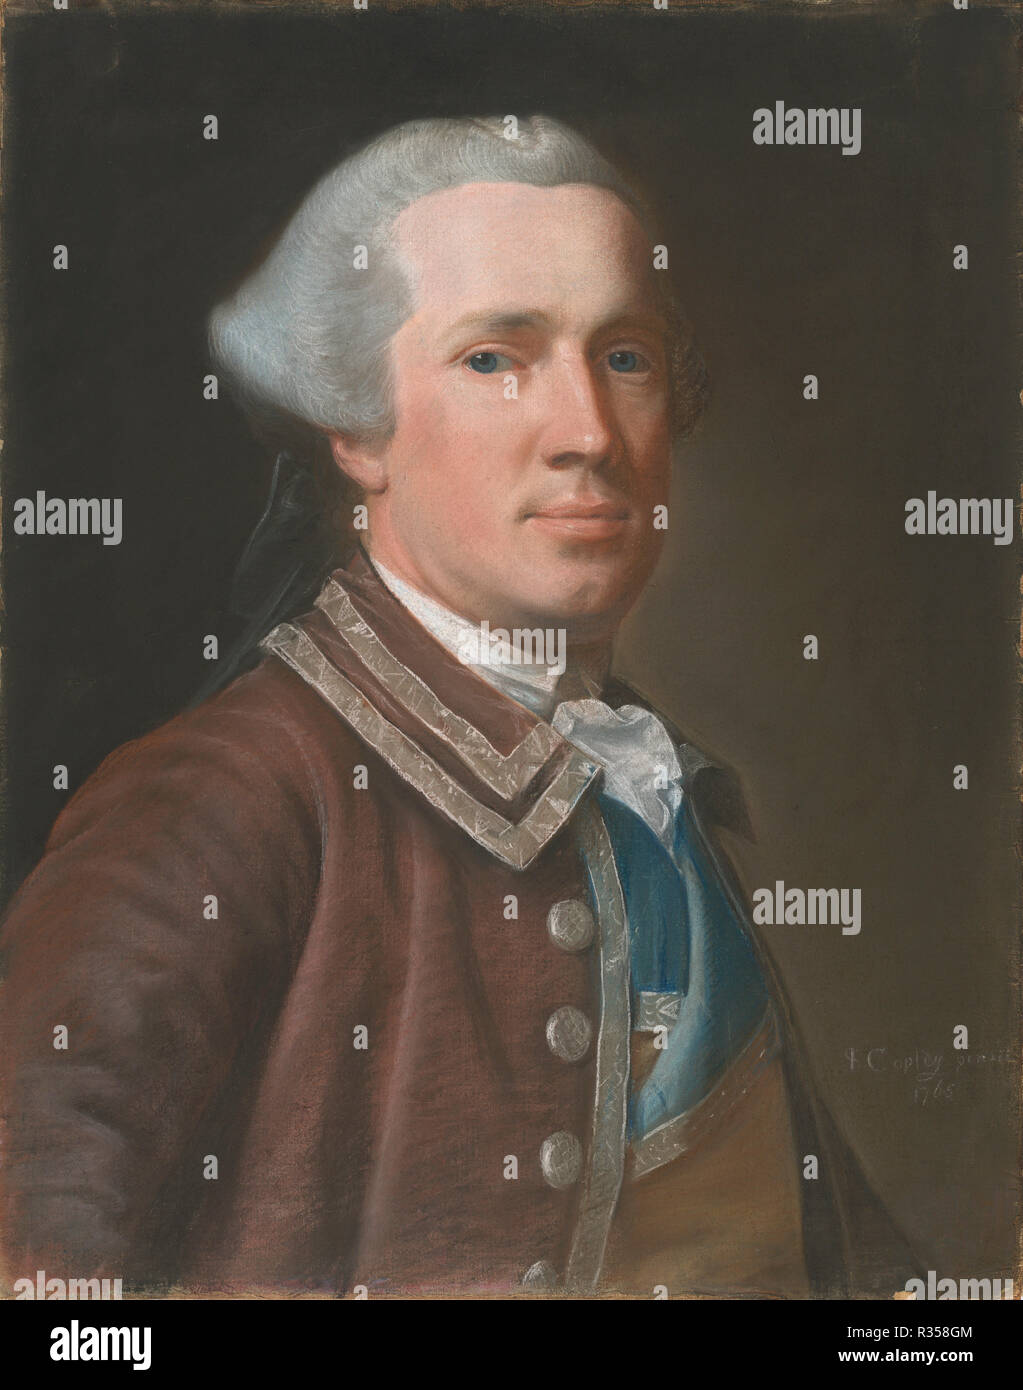 John Temple. Dated: 1765. Dimensions: overall: 59.7 x 40 cm (23 1/2 x 15 3/4 in.). Medium: pastel on paper mounted on canvas. Museum: National Gallery of Art, Washington DC. Author: John Singleton Copley. Stock Photo